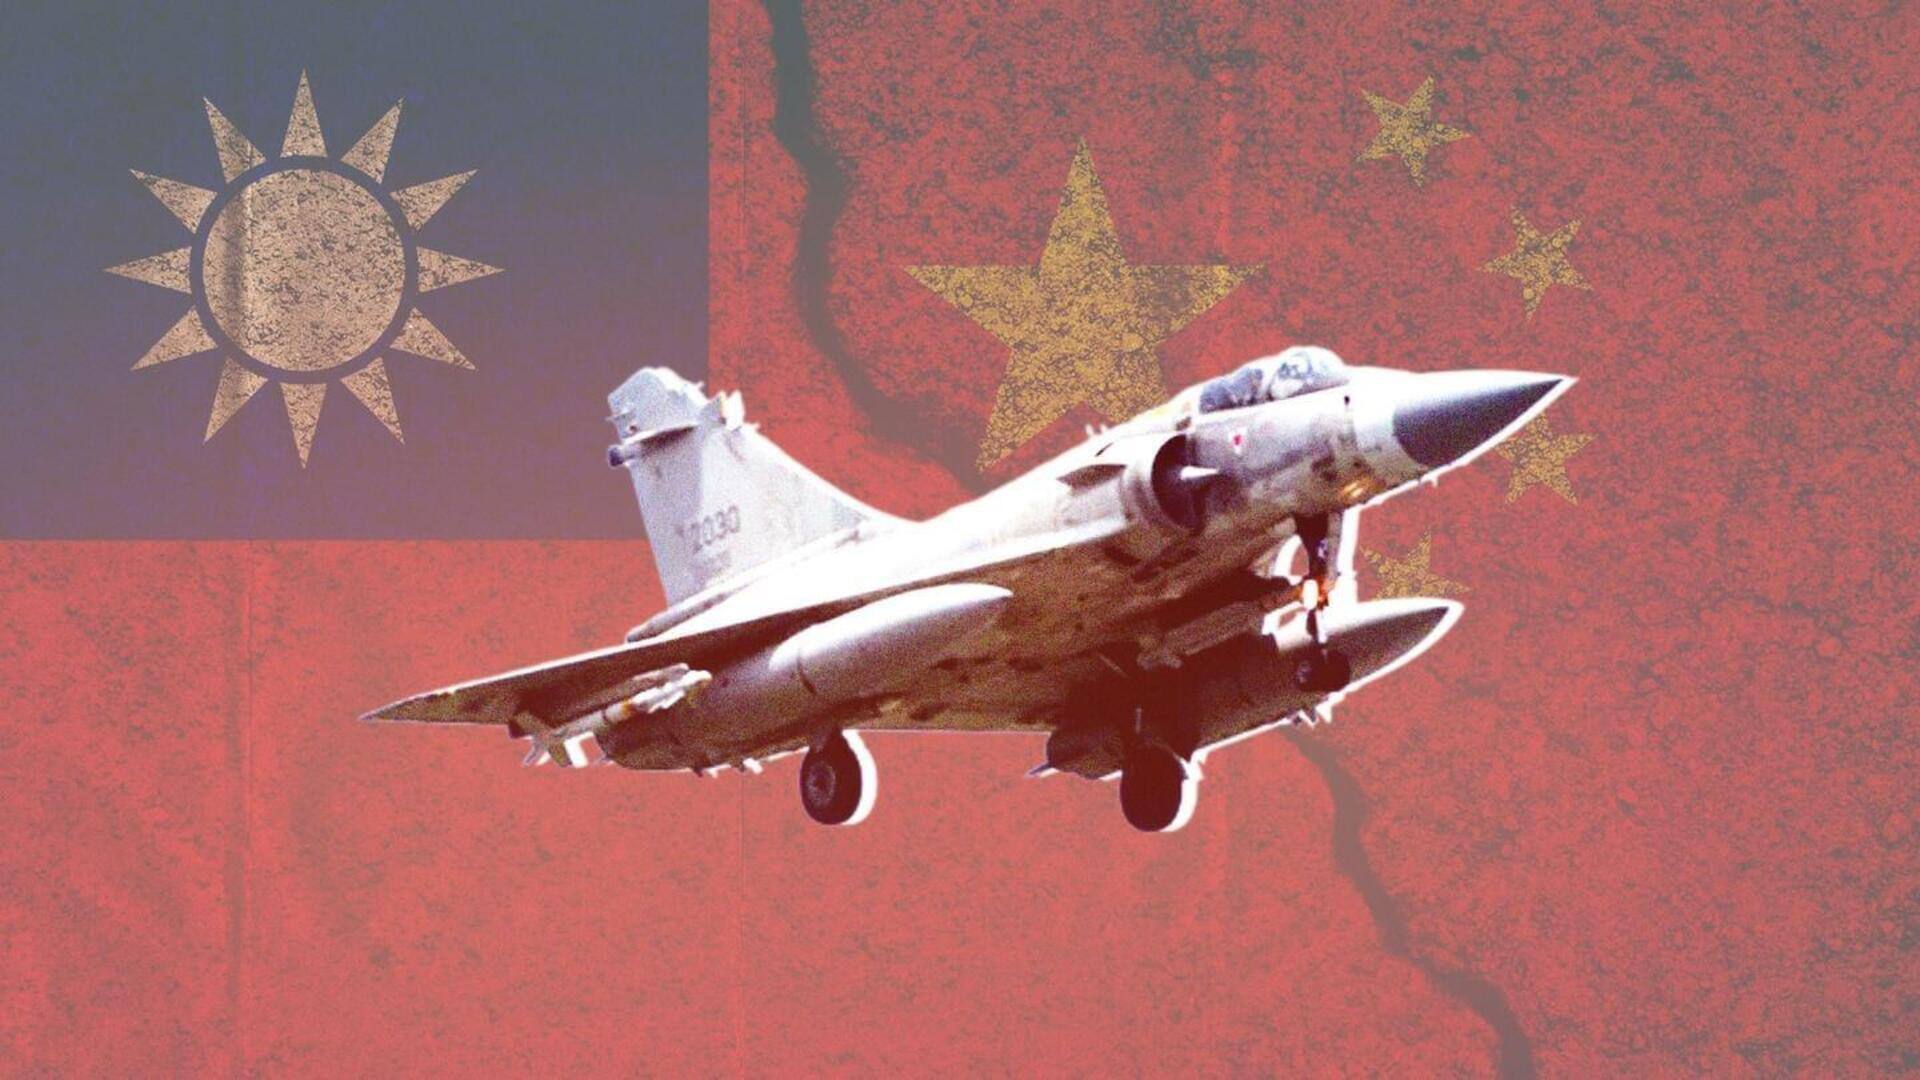 Taiwan detects 103 Chinese warplanes near island in 24 hours